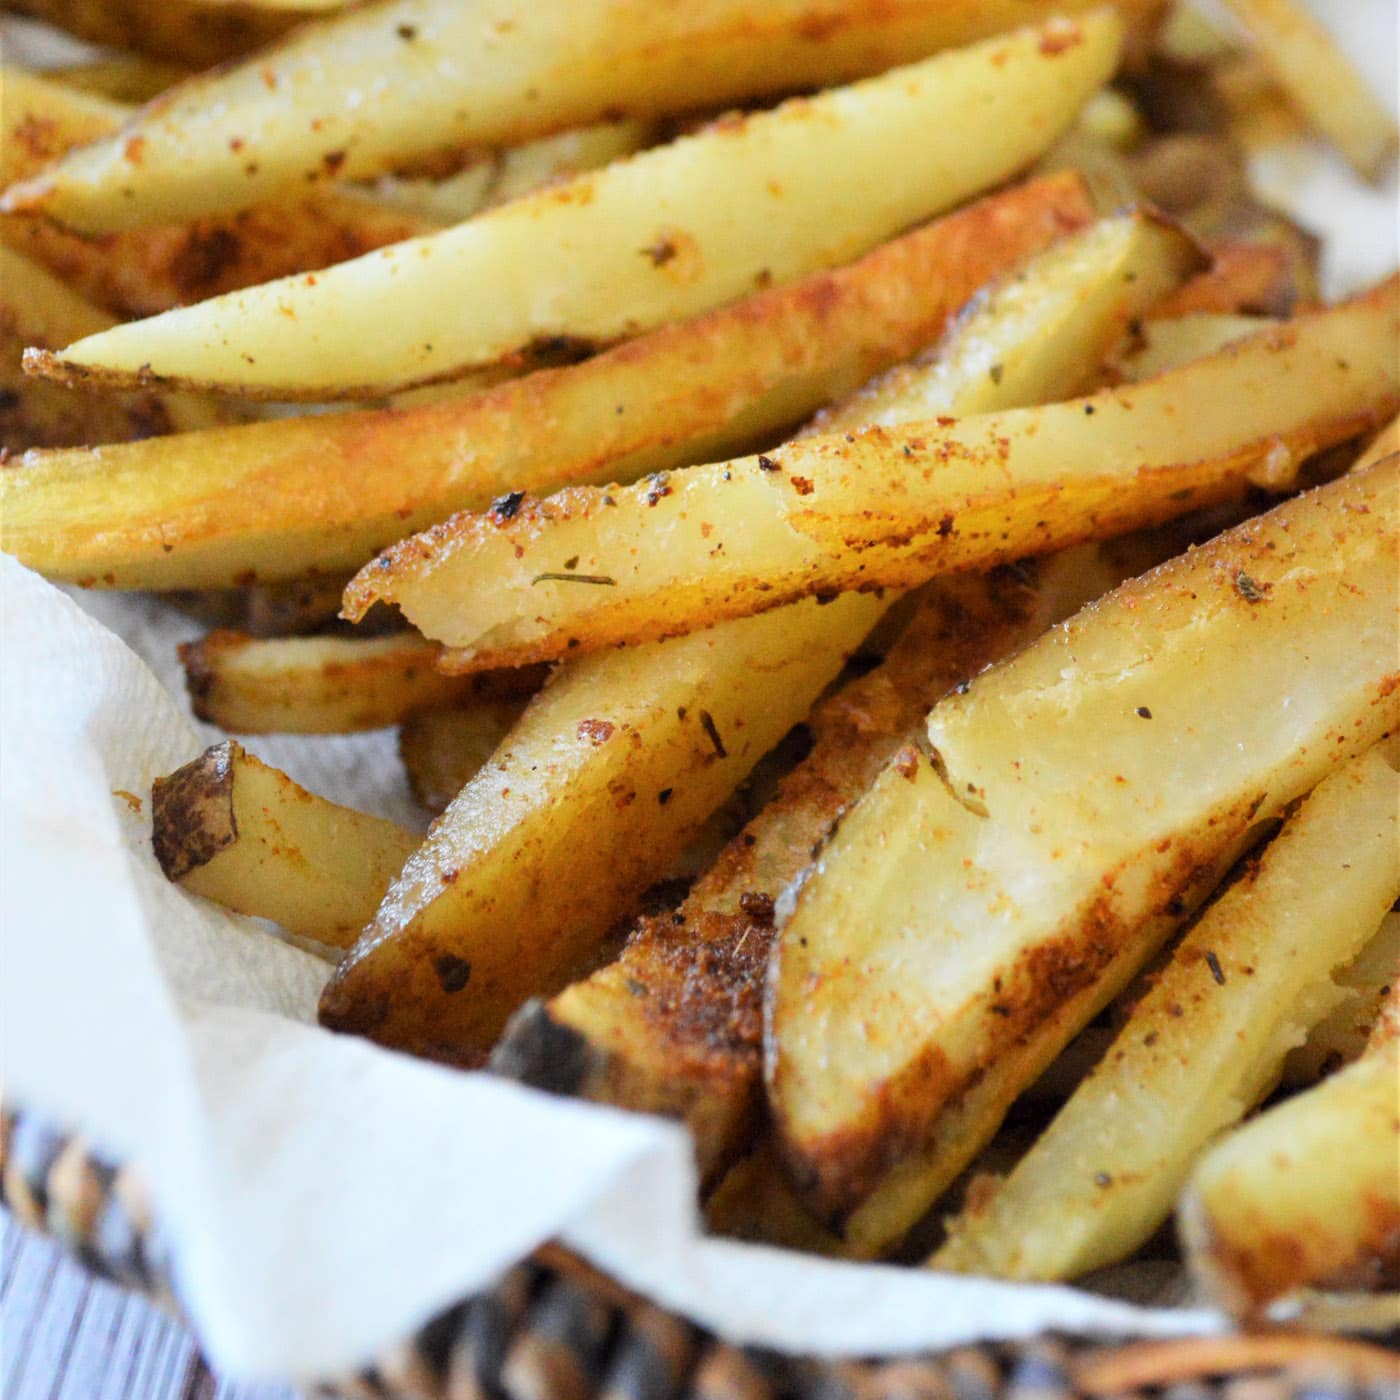 https://amandascookin.com/wp-content/uploads/2021/12/Baked-French-Fries-SQ-RC.jpg